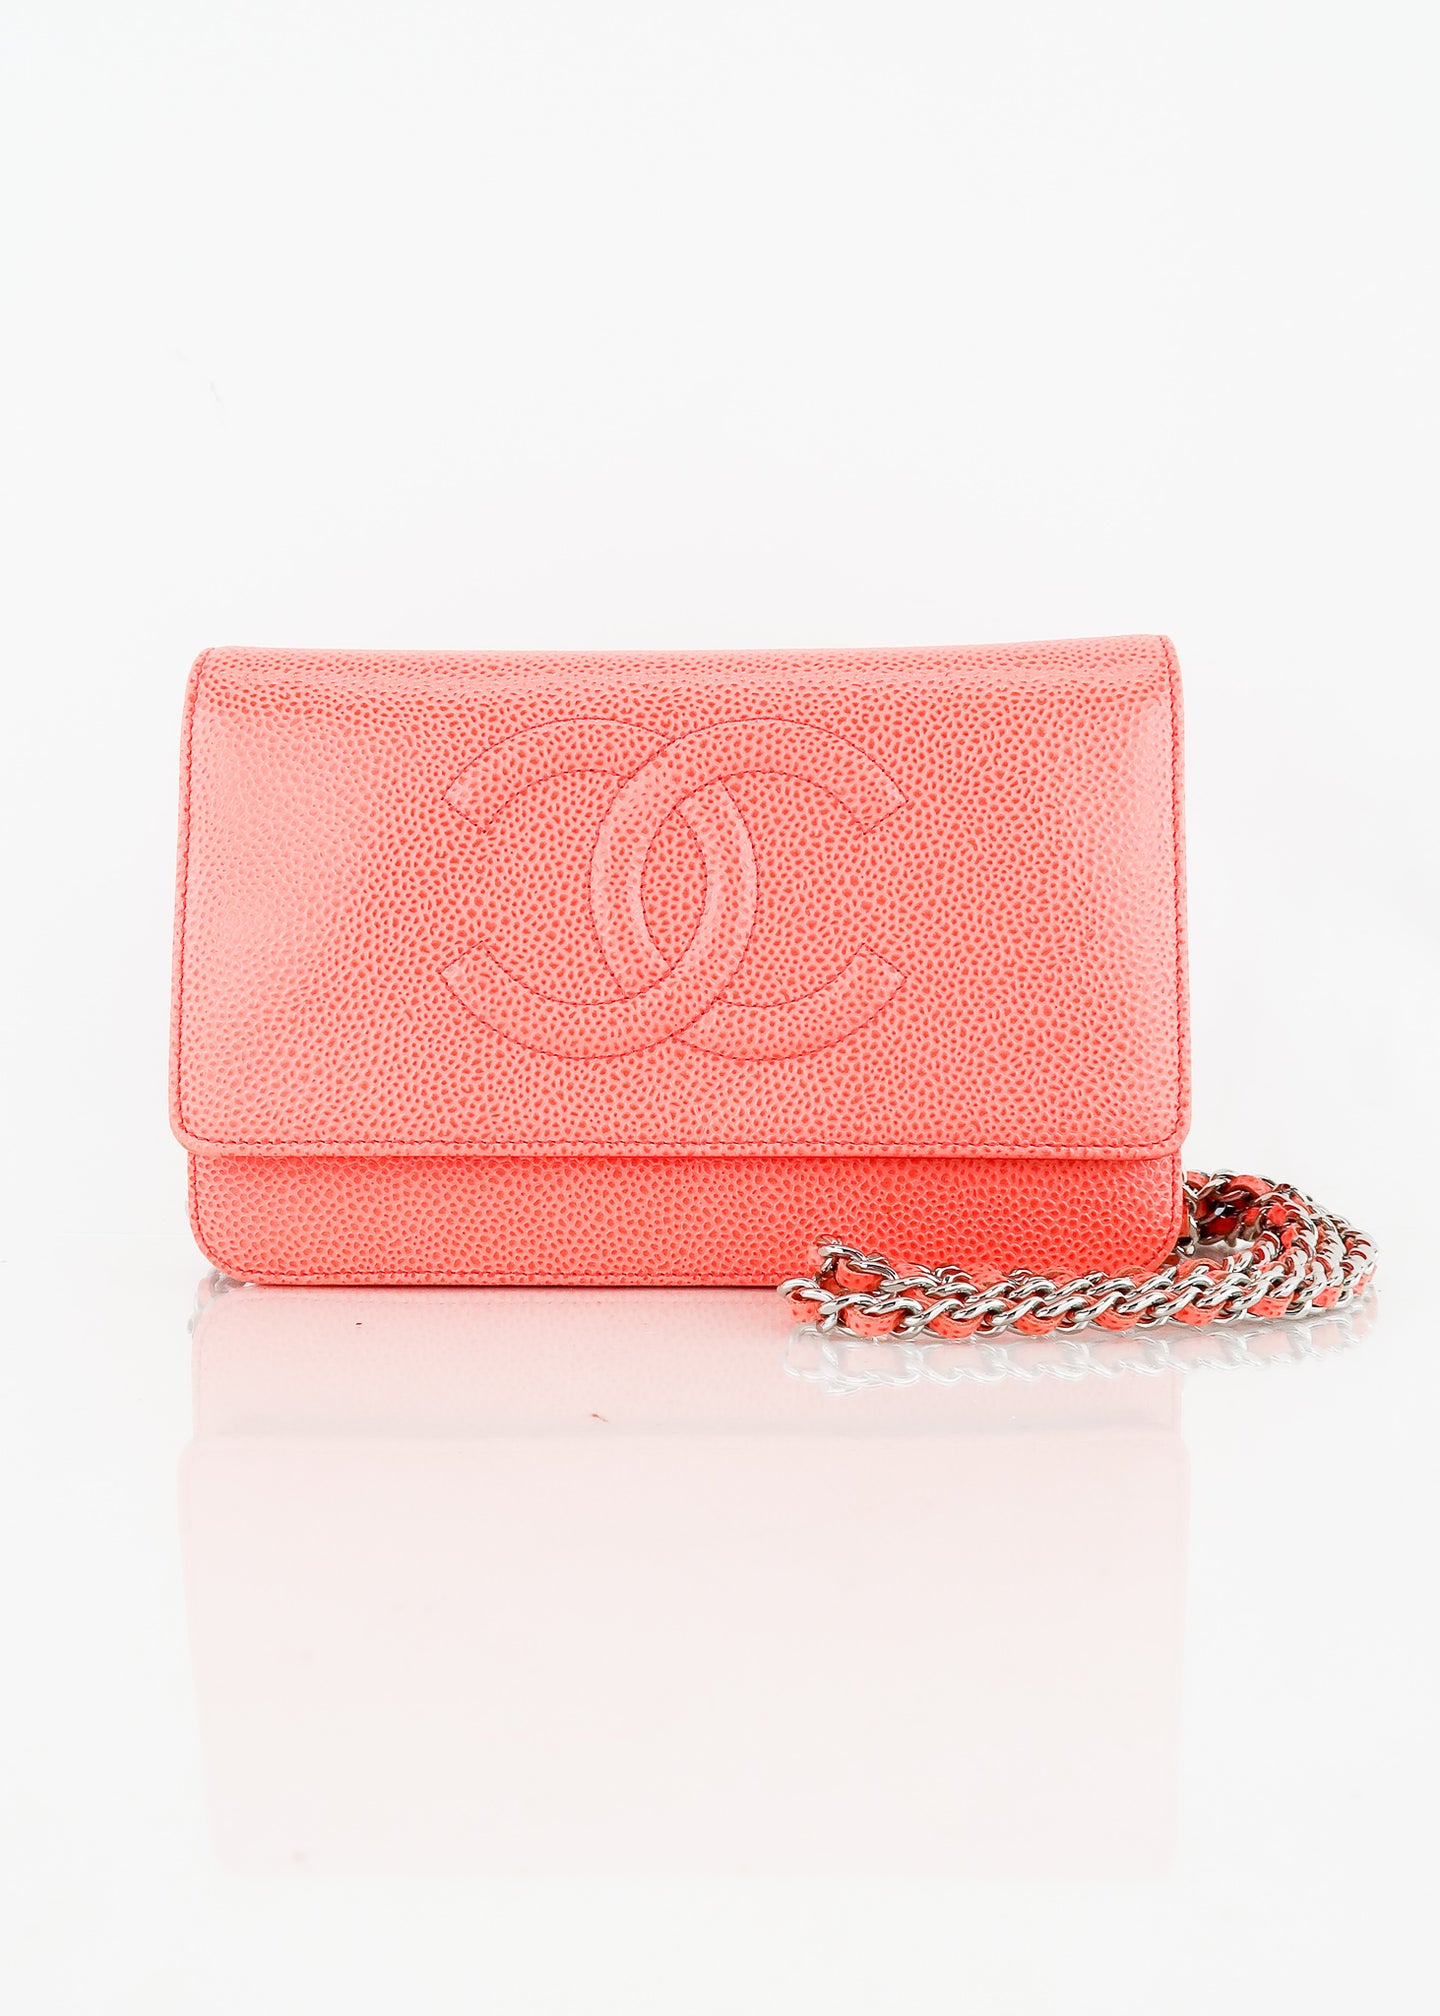 CHANEL - CC Strass Champagne Patent Leather - WOC Wallet on Chain Cros -  BougieHabit